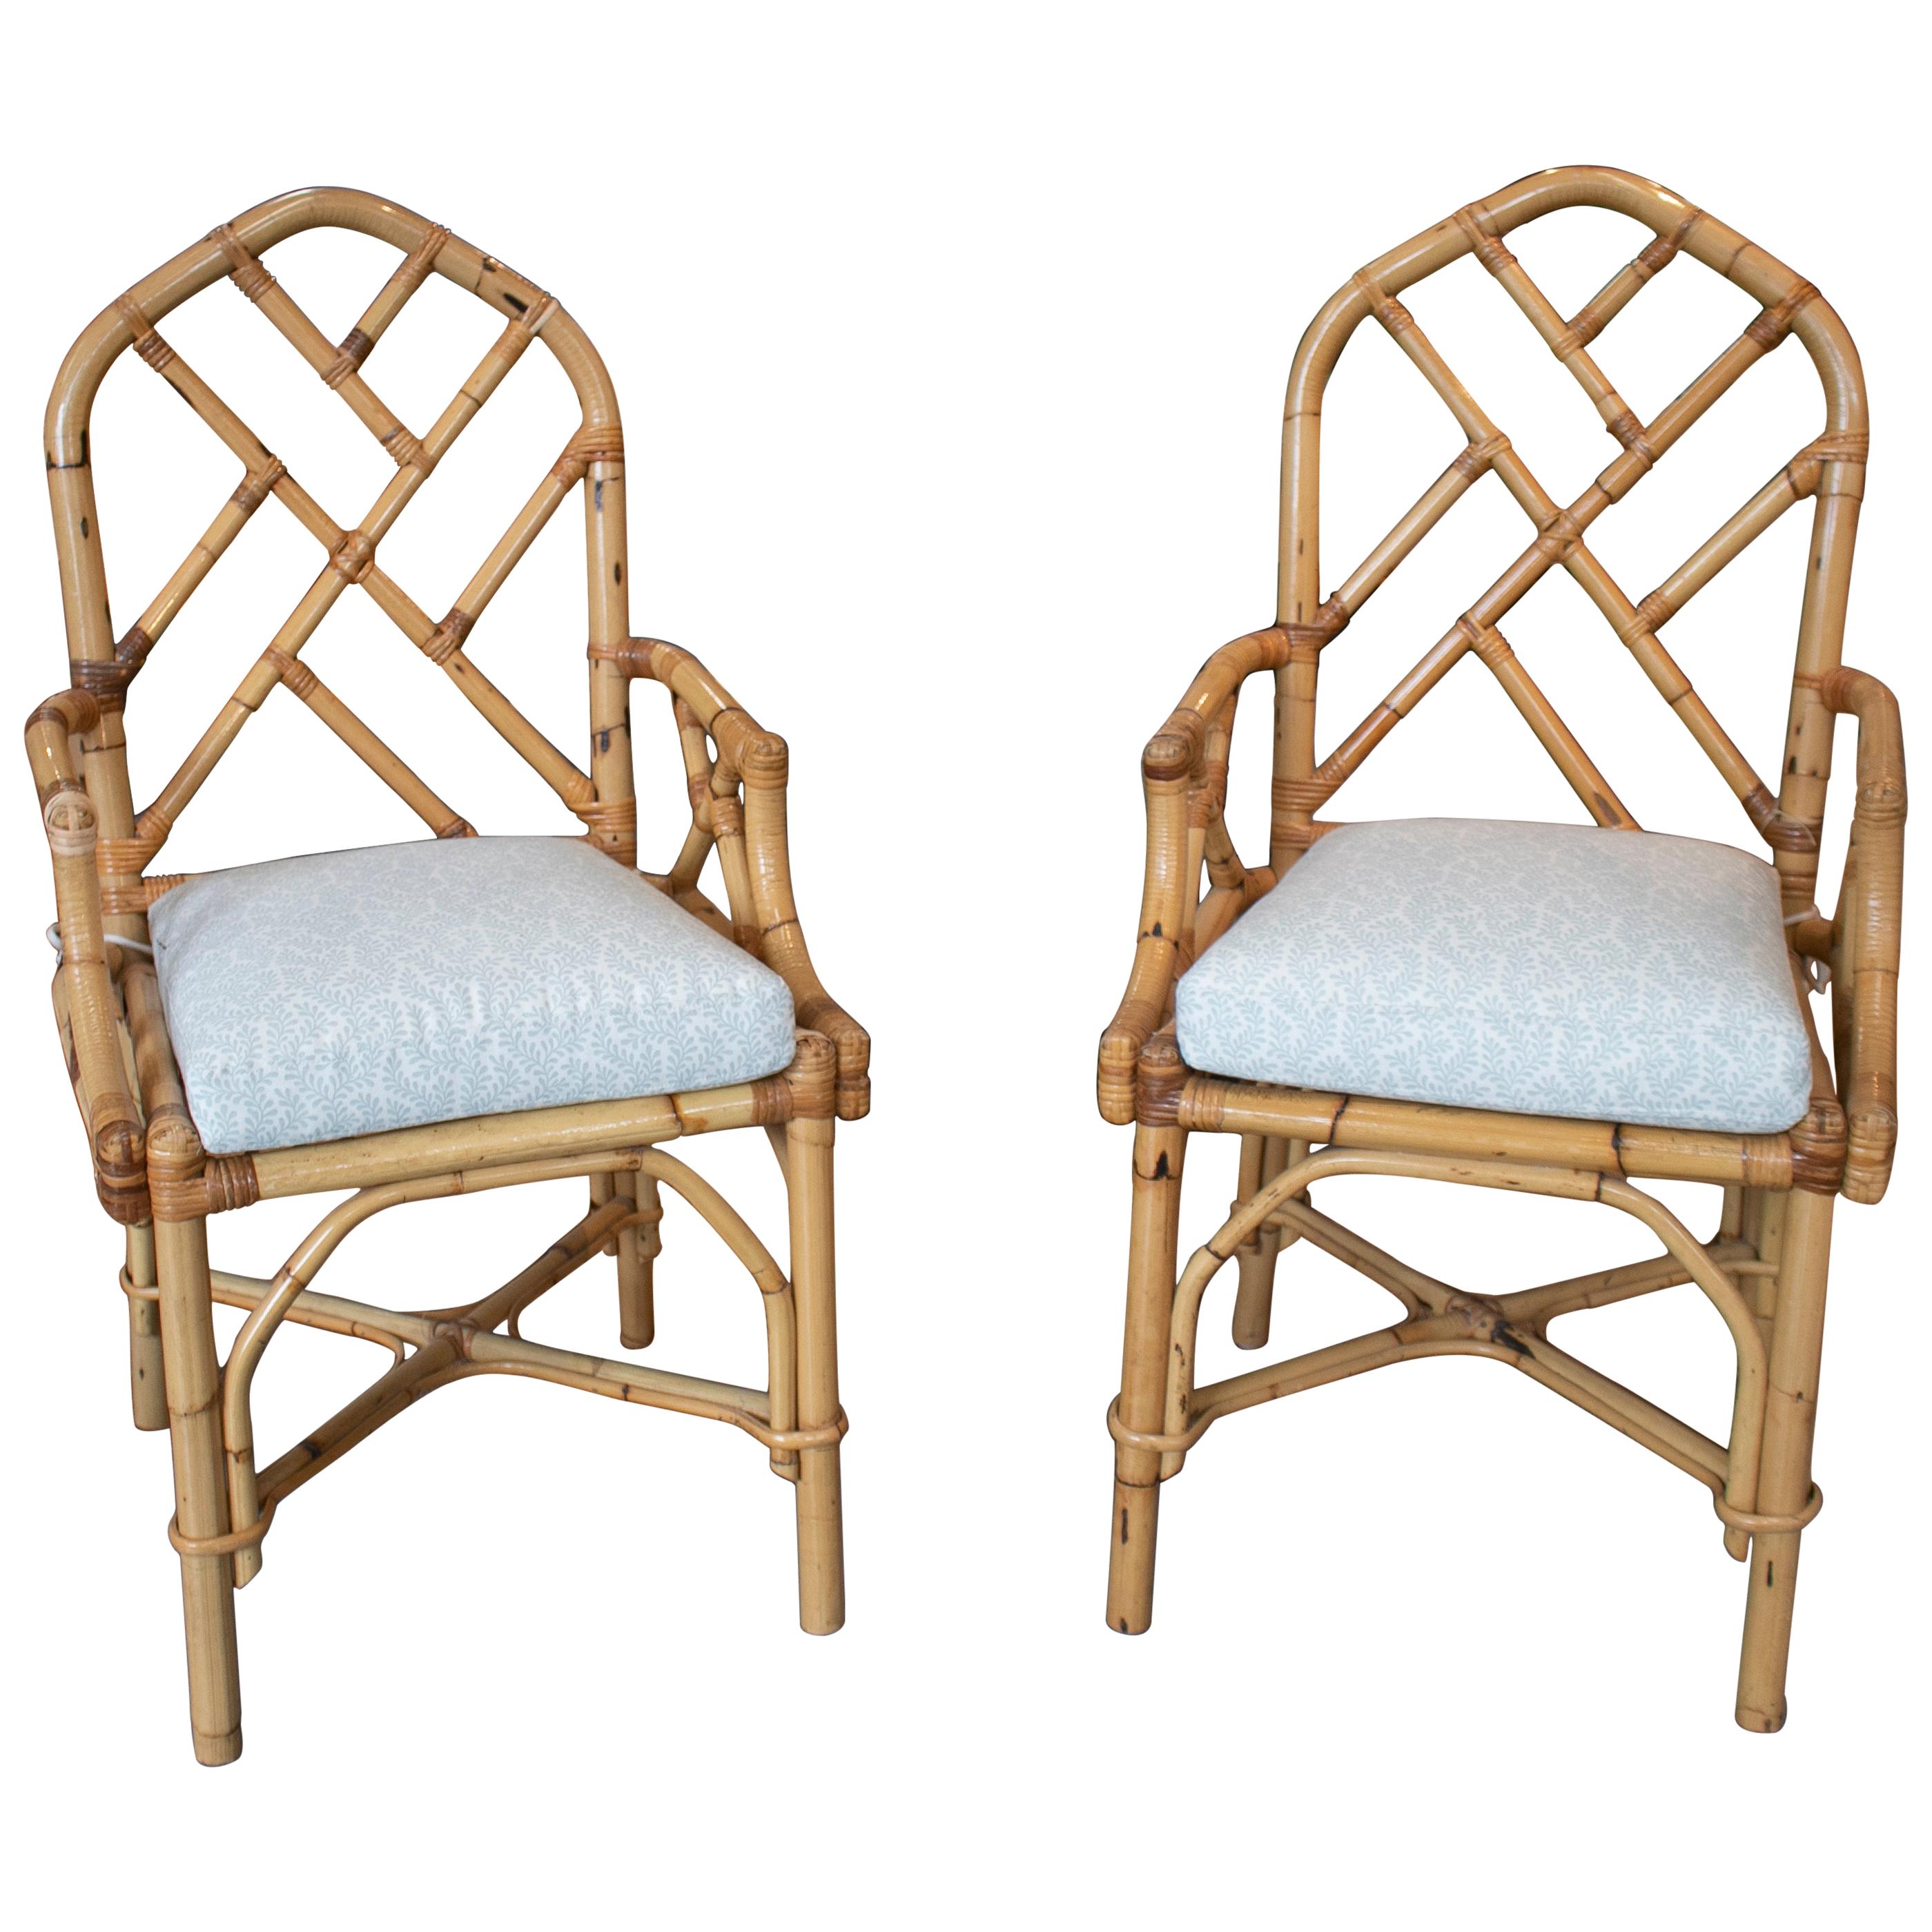 1970s Spanish Pair of Bamboo Chairs with Seat Cushions